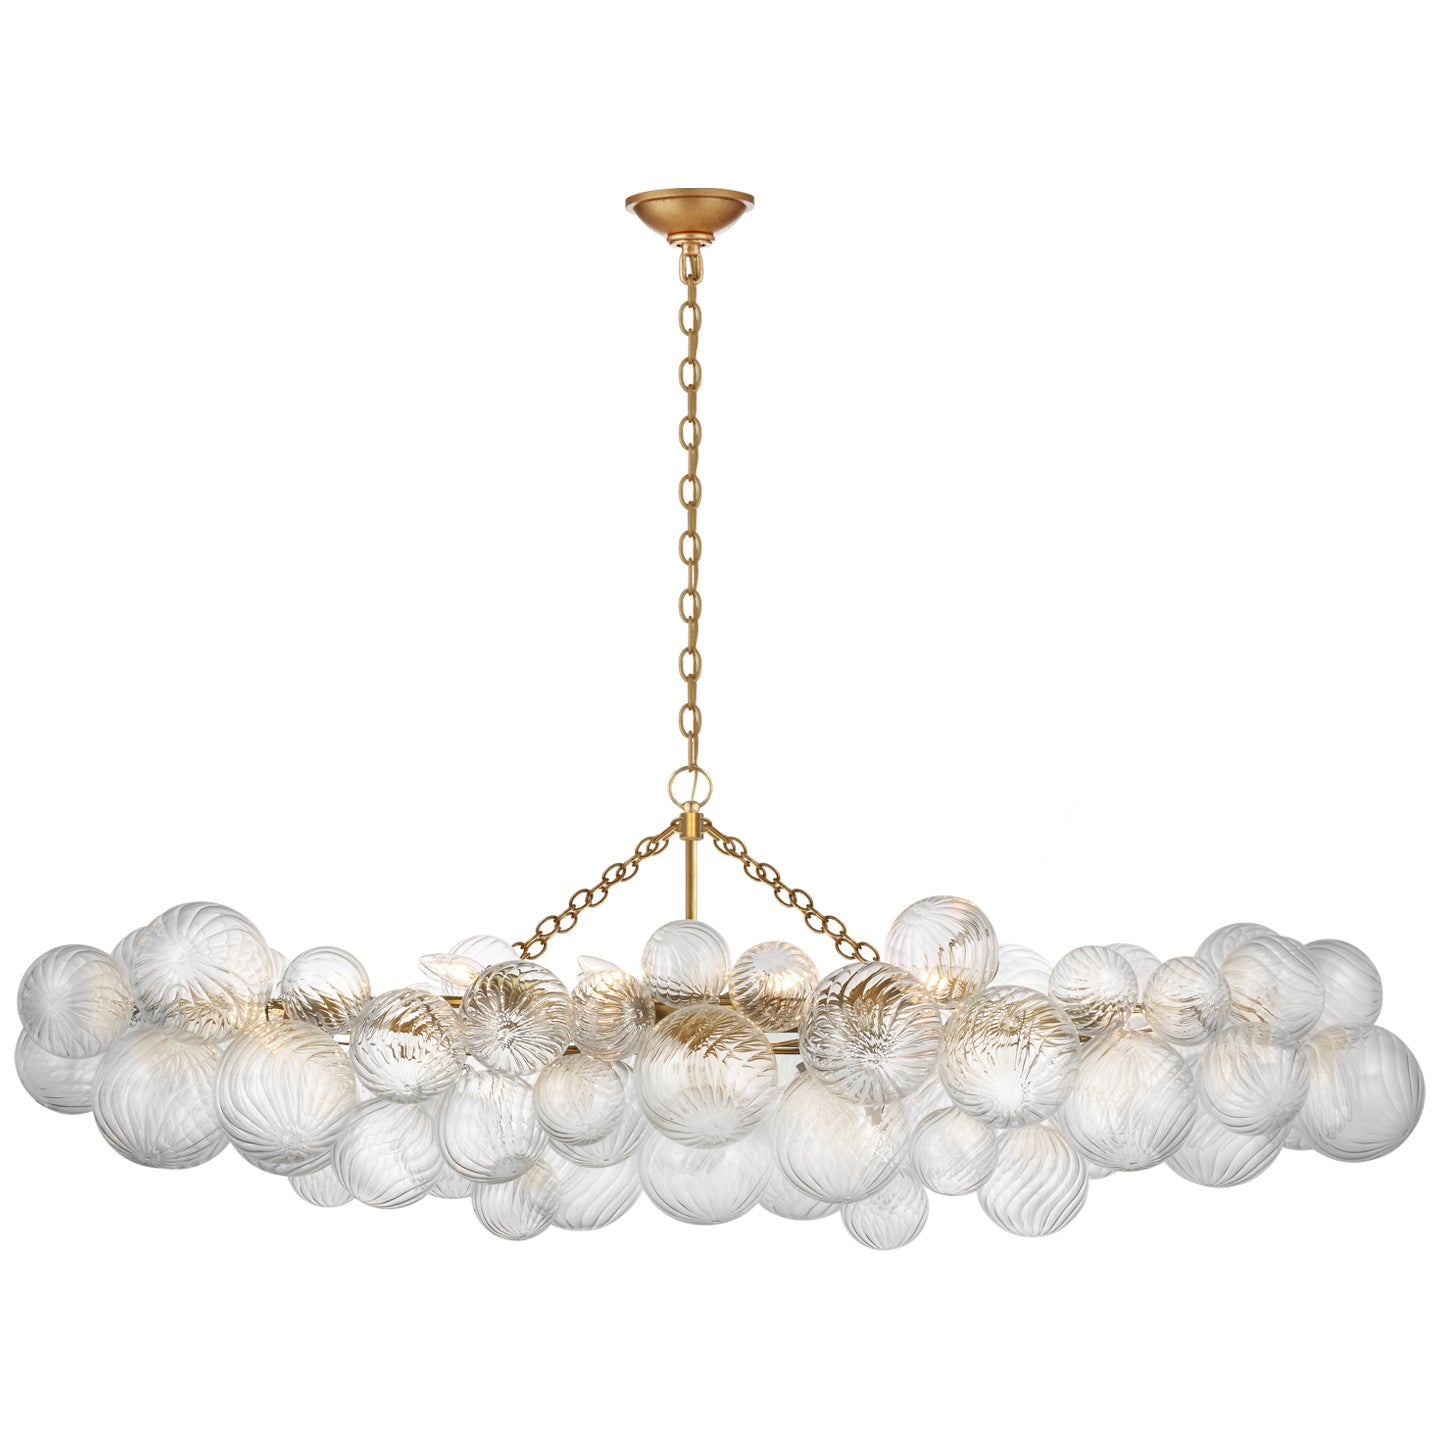 Load image into Gallery viewer, Visual Comfort Signature - JN 5117G-CG - LED Linear Chandelier - Talia - Gild
